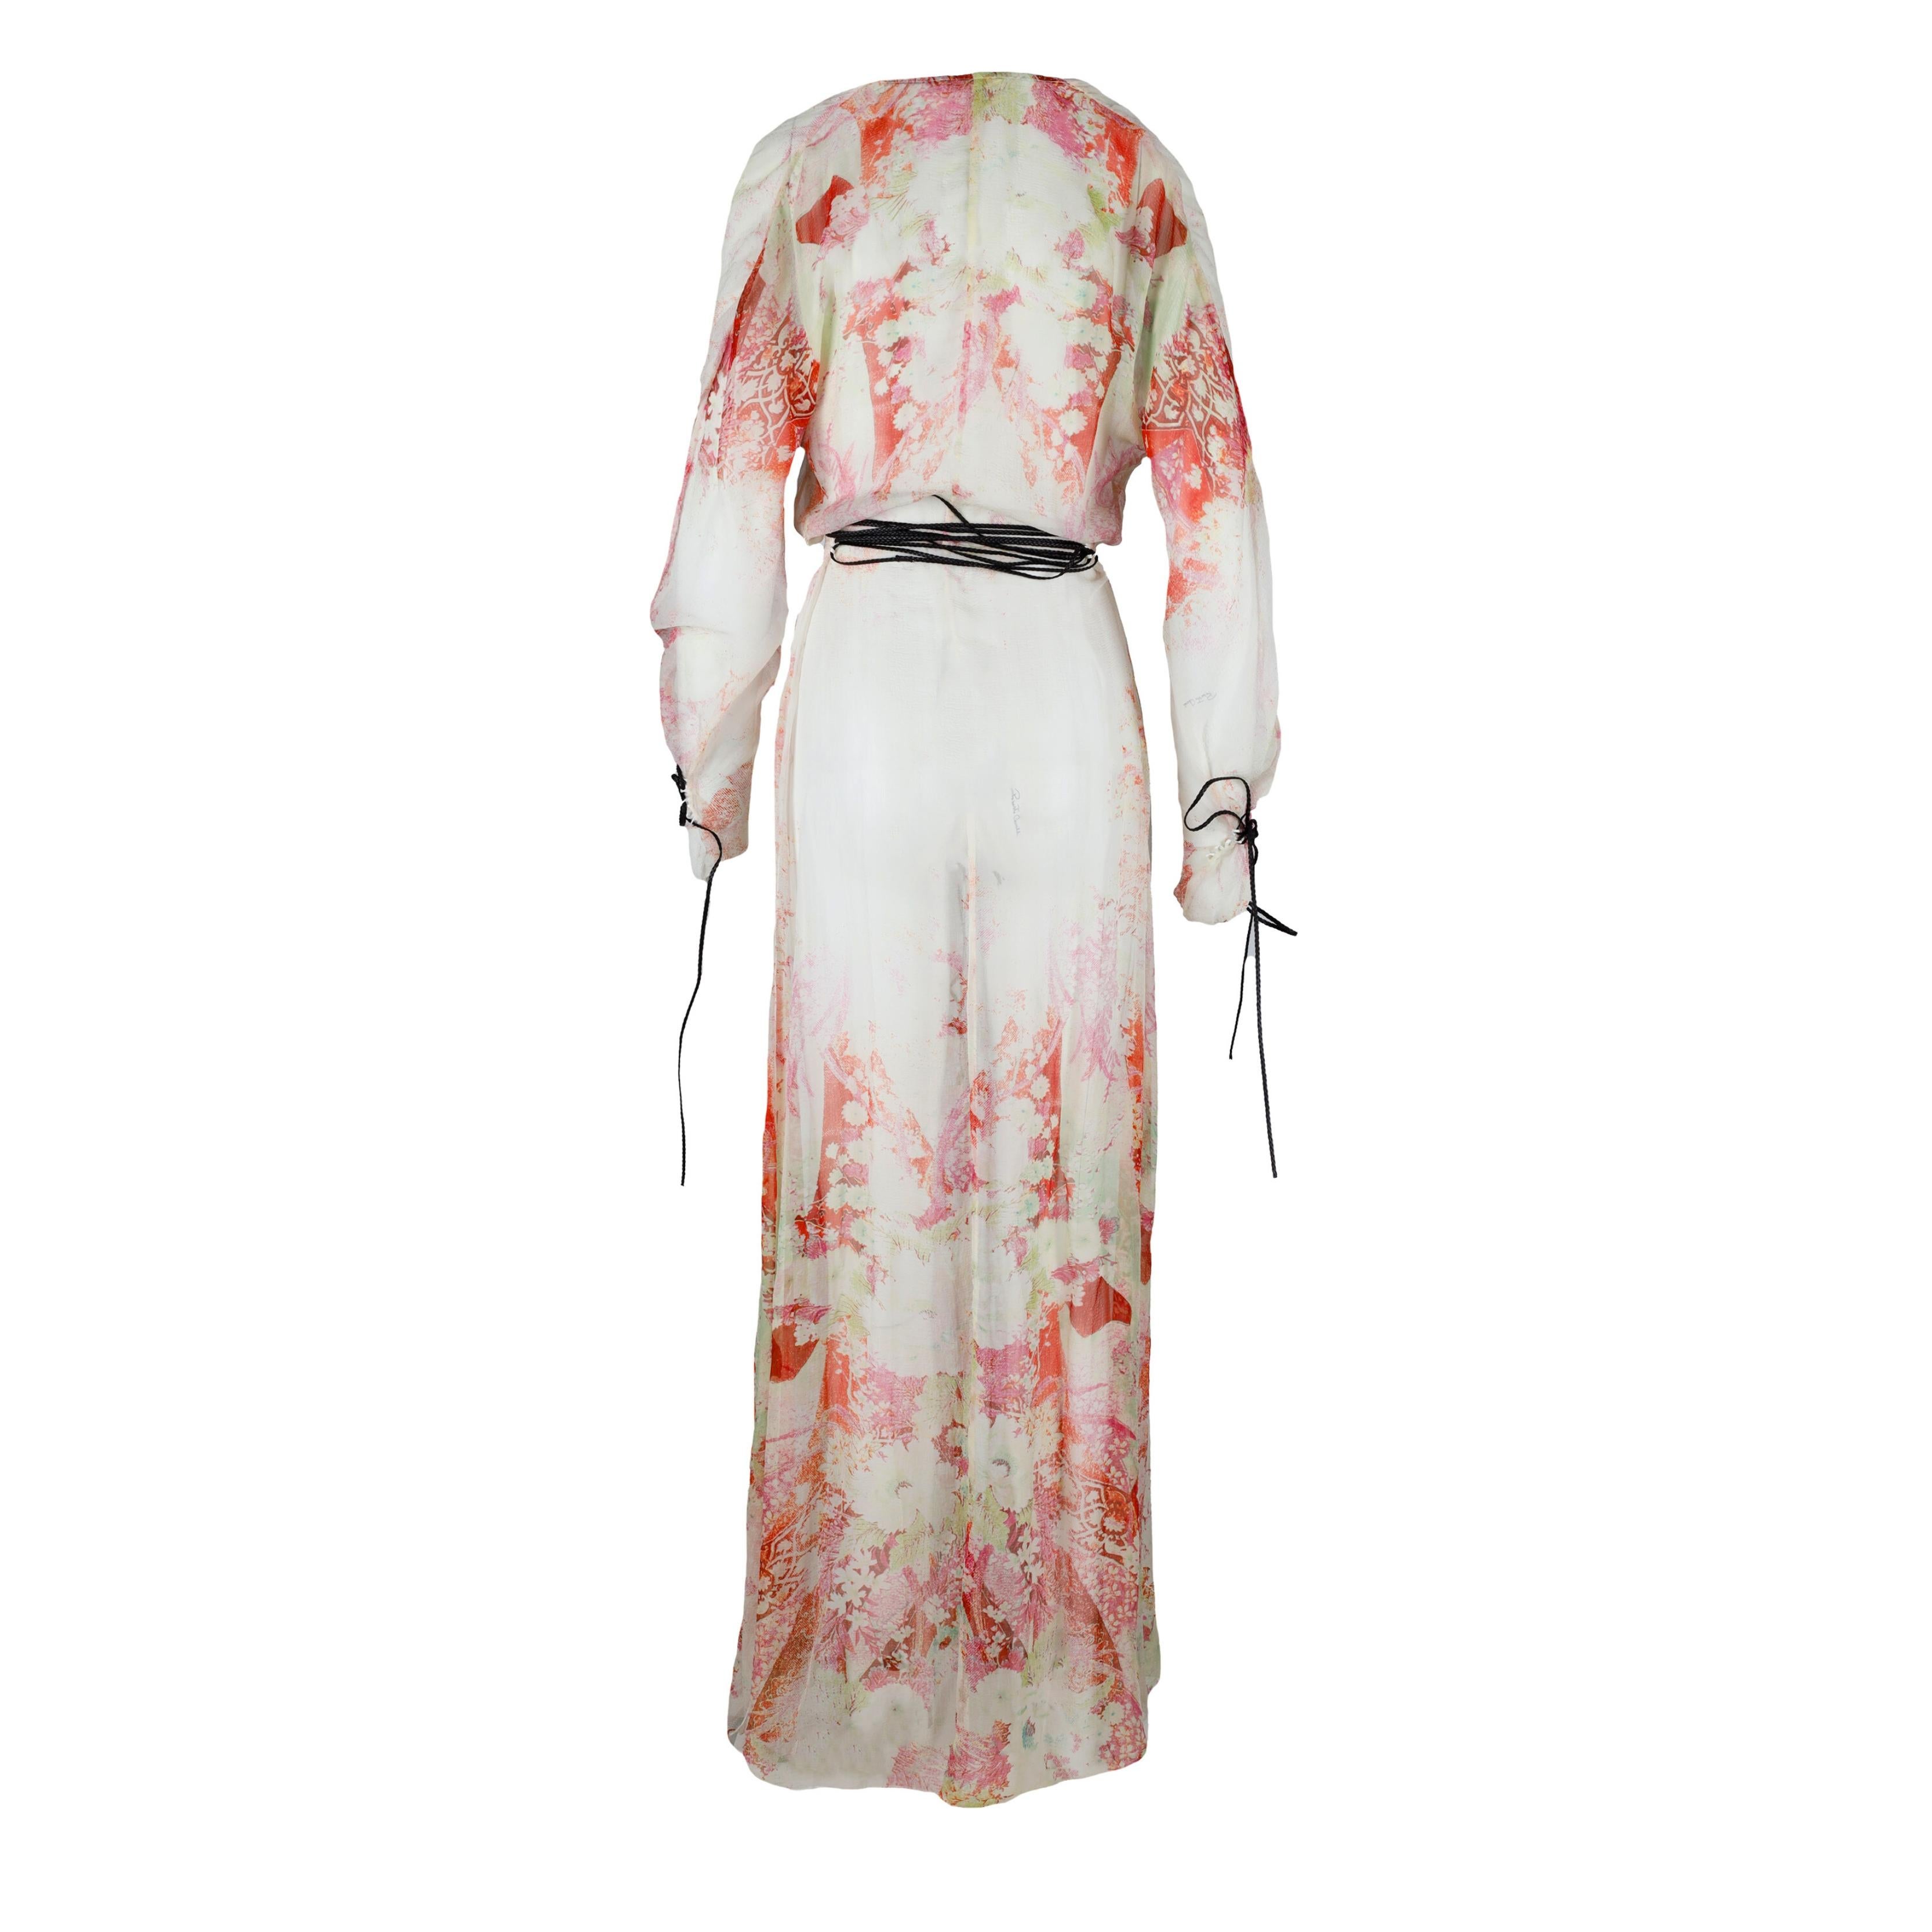 This Roberto Cavalli dress features a luxurious silk material in a multicolor floral print for a refined and elegant look. Cinched with a stylish braided leather rope, the dress gracefully drapes to the hemline with slits and panels, creating a